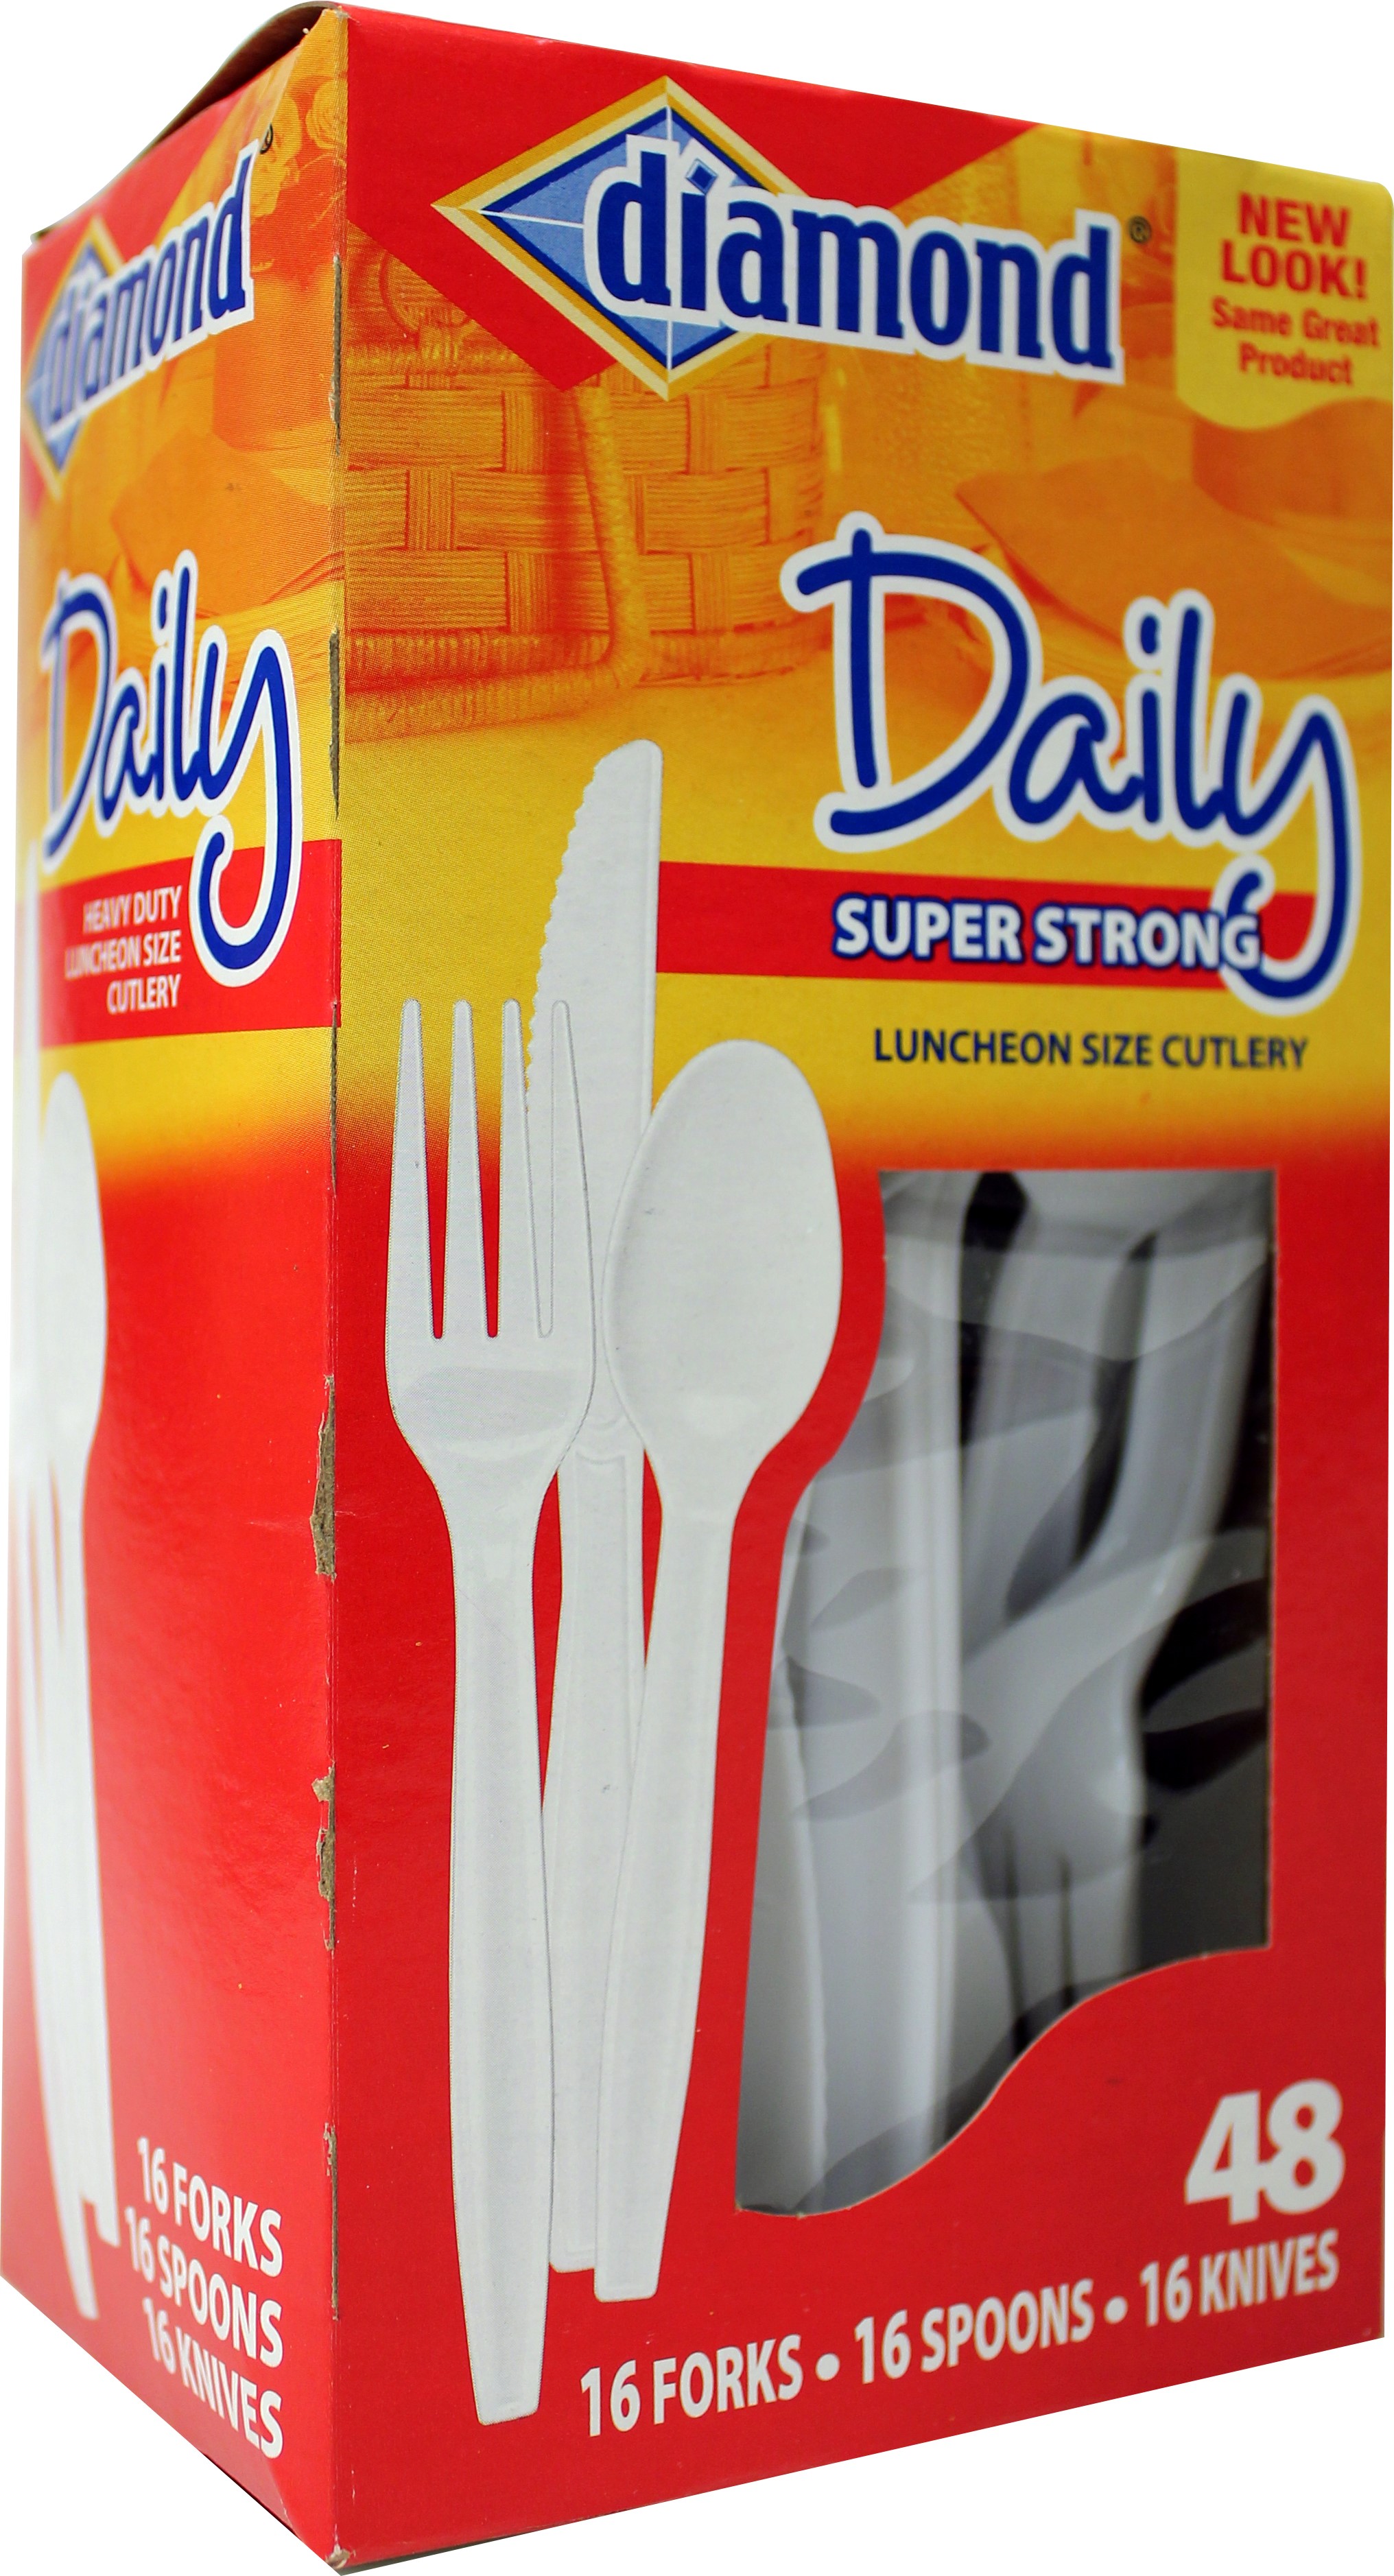 Diamond Heavy Duty Combo Cutlery Pack, White, 48 Ct - image 1 of 4